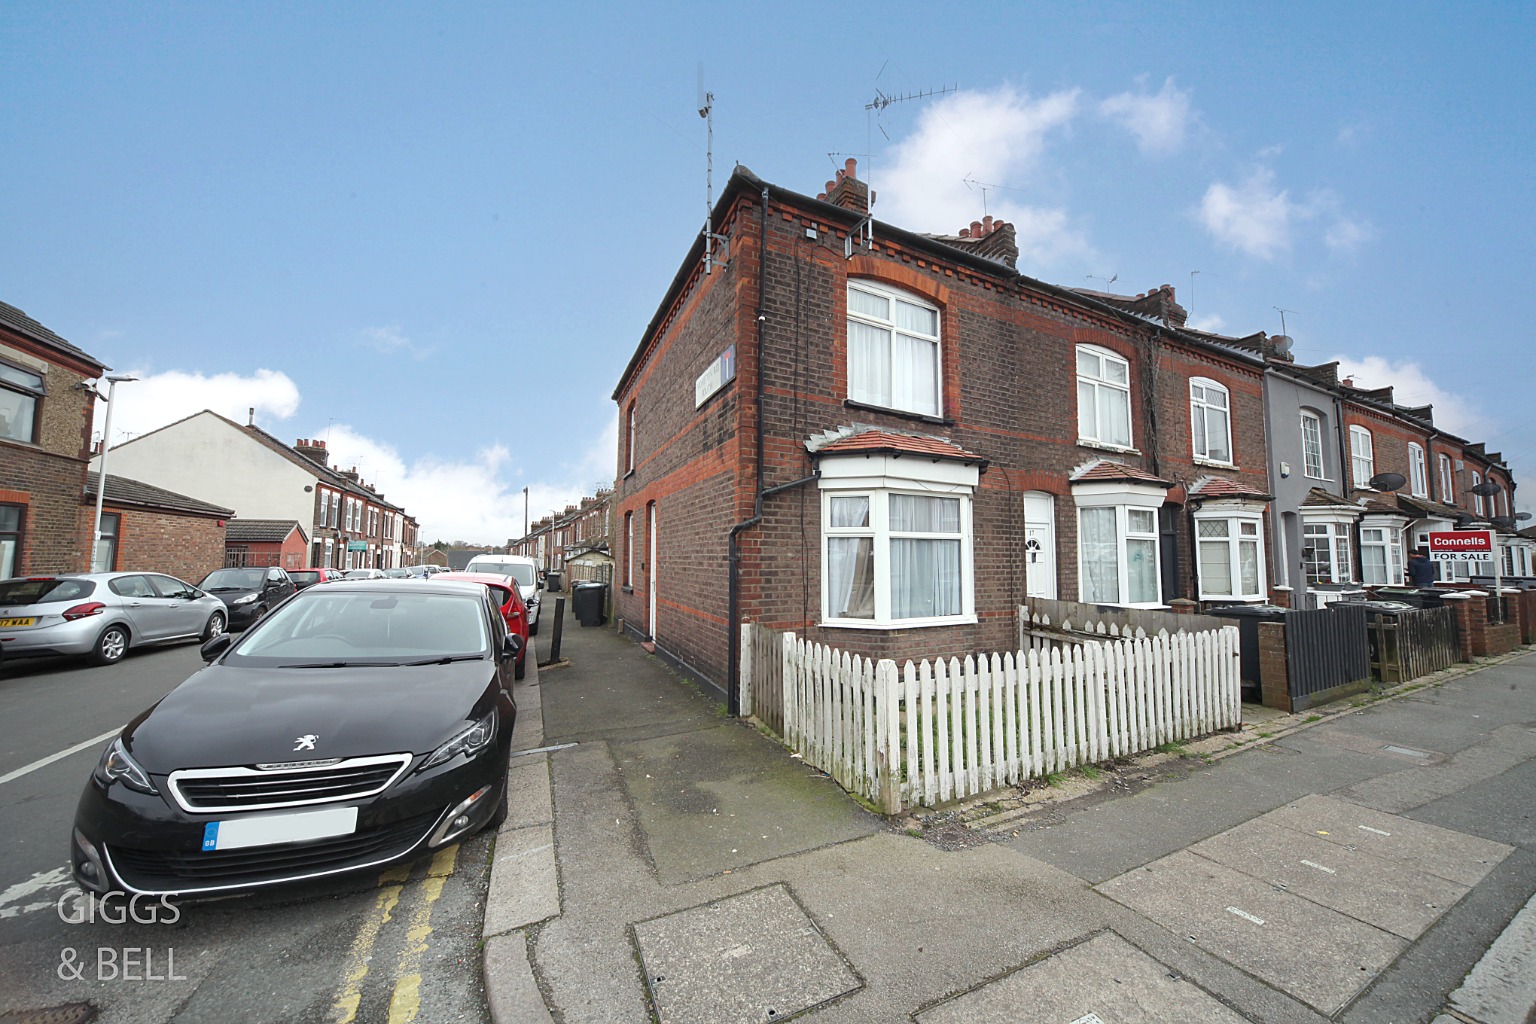 3 bed terraced house for sale in Moreton Road South, Luton, LU2 